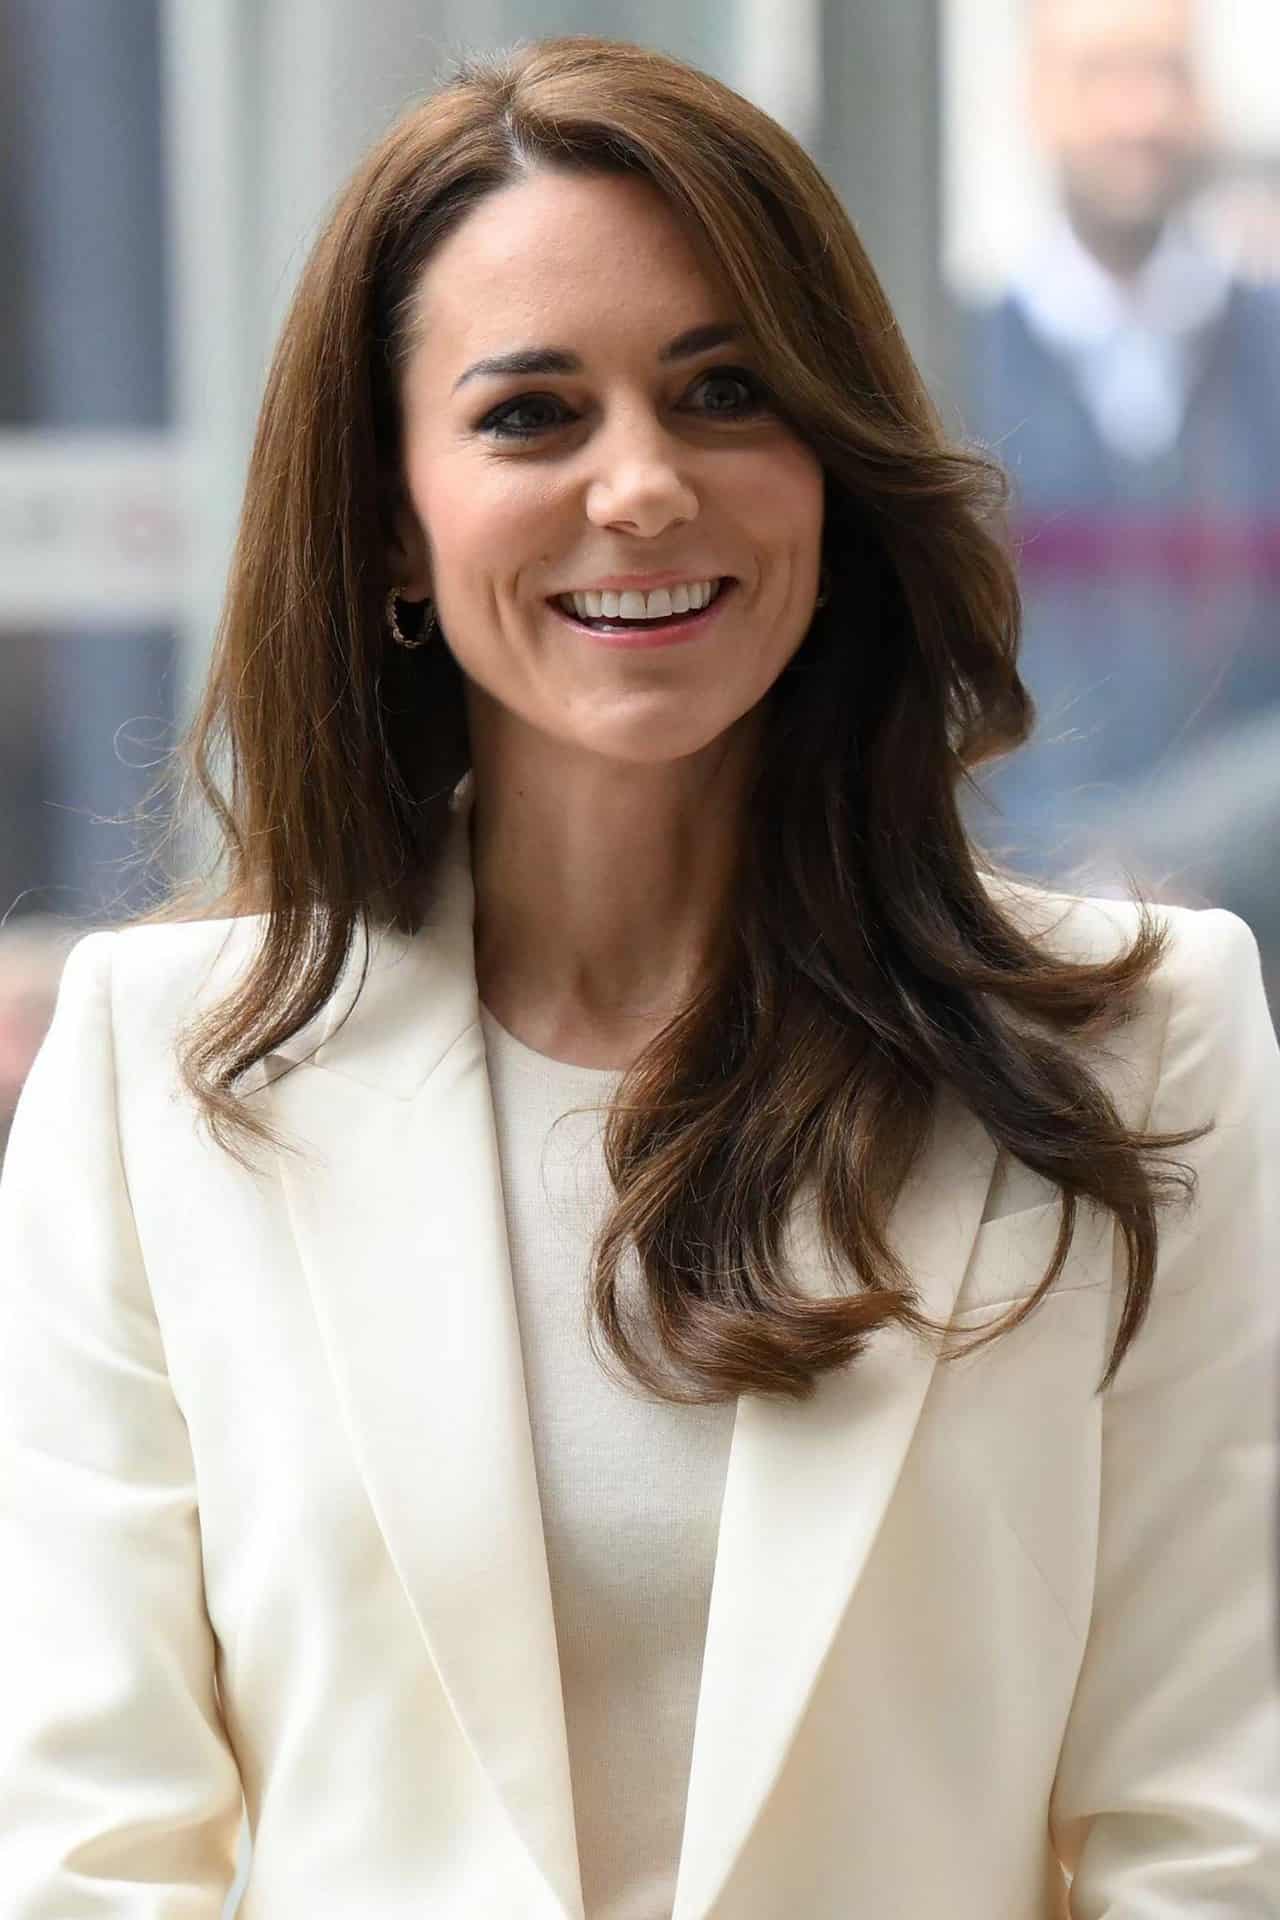 Kate Middleton is Chic and Stylish for Business Taskforce Launch